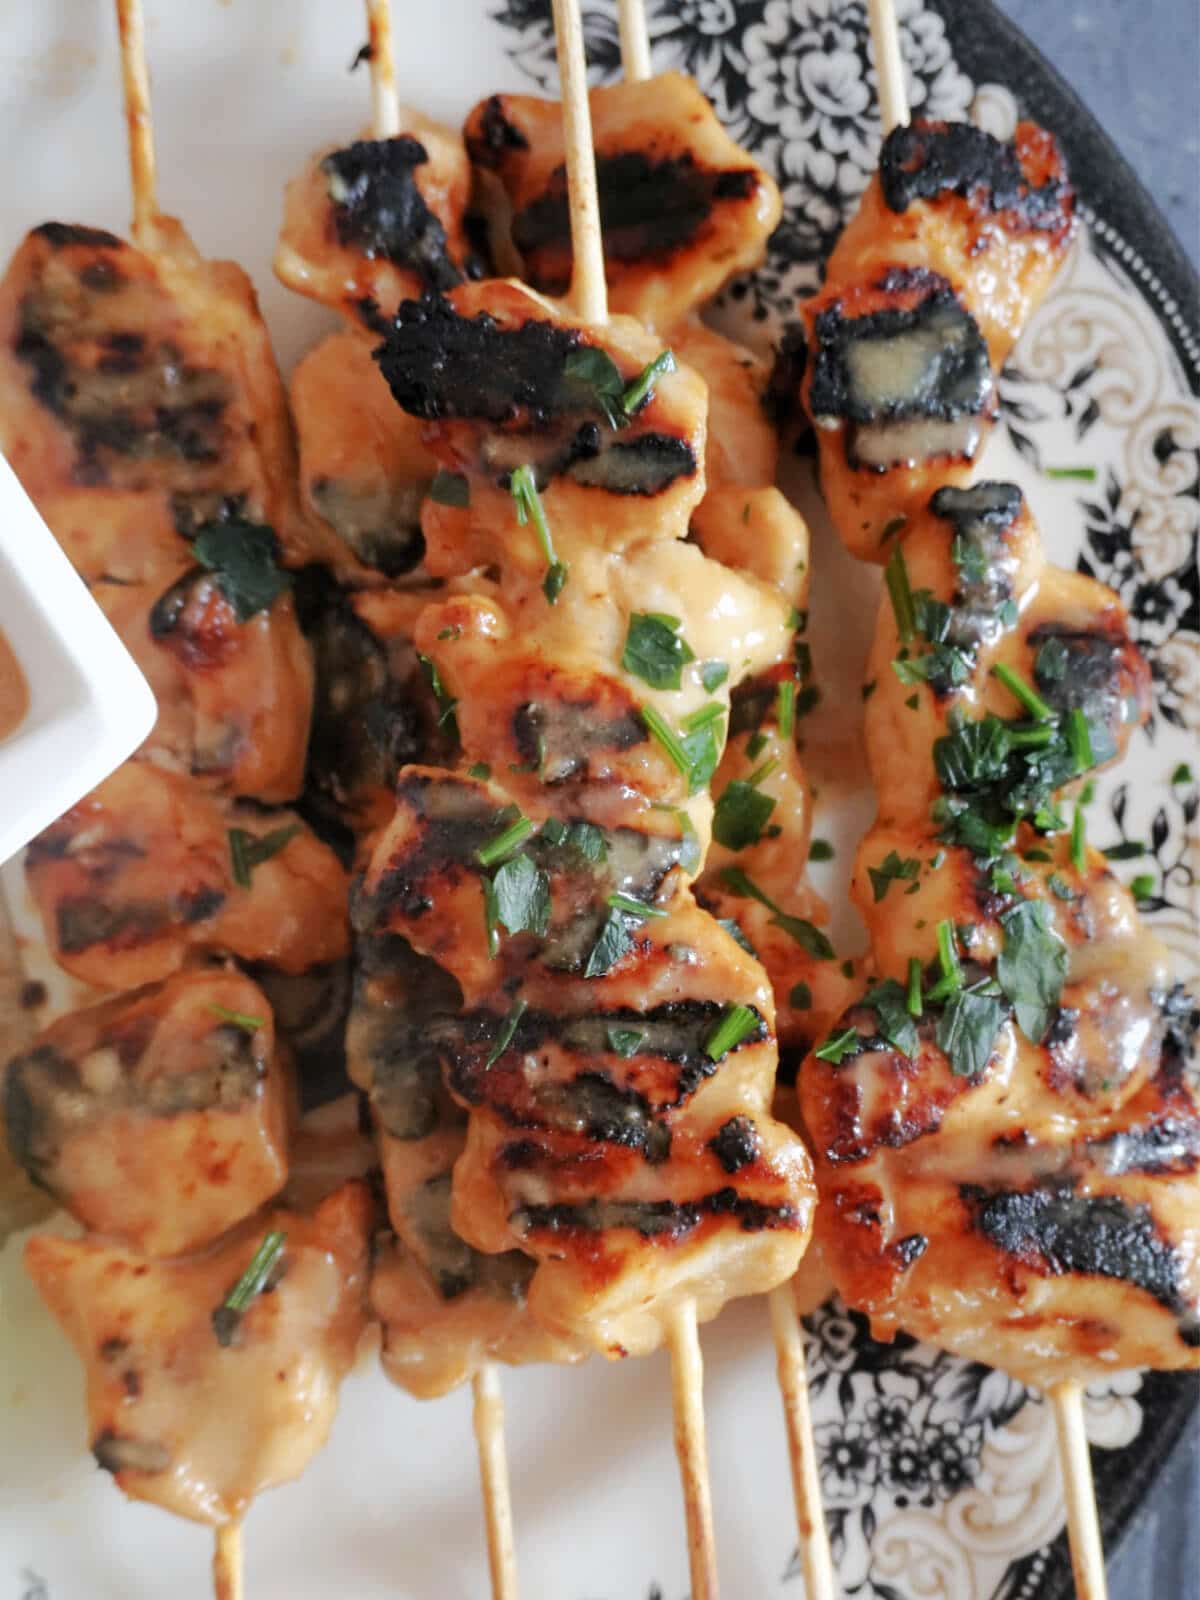 Chicken satay skewers on a plate.